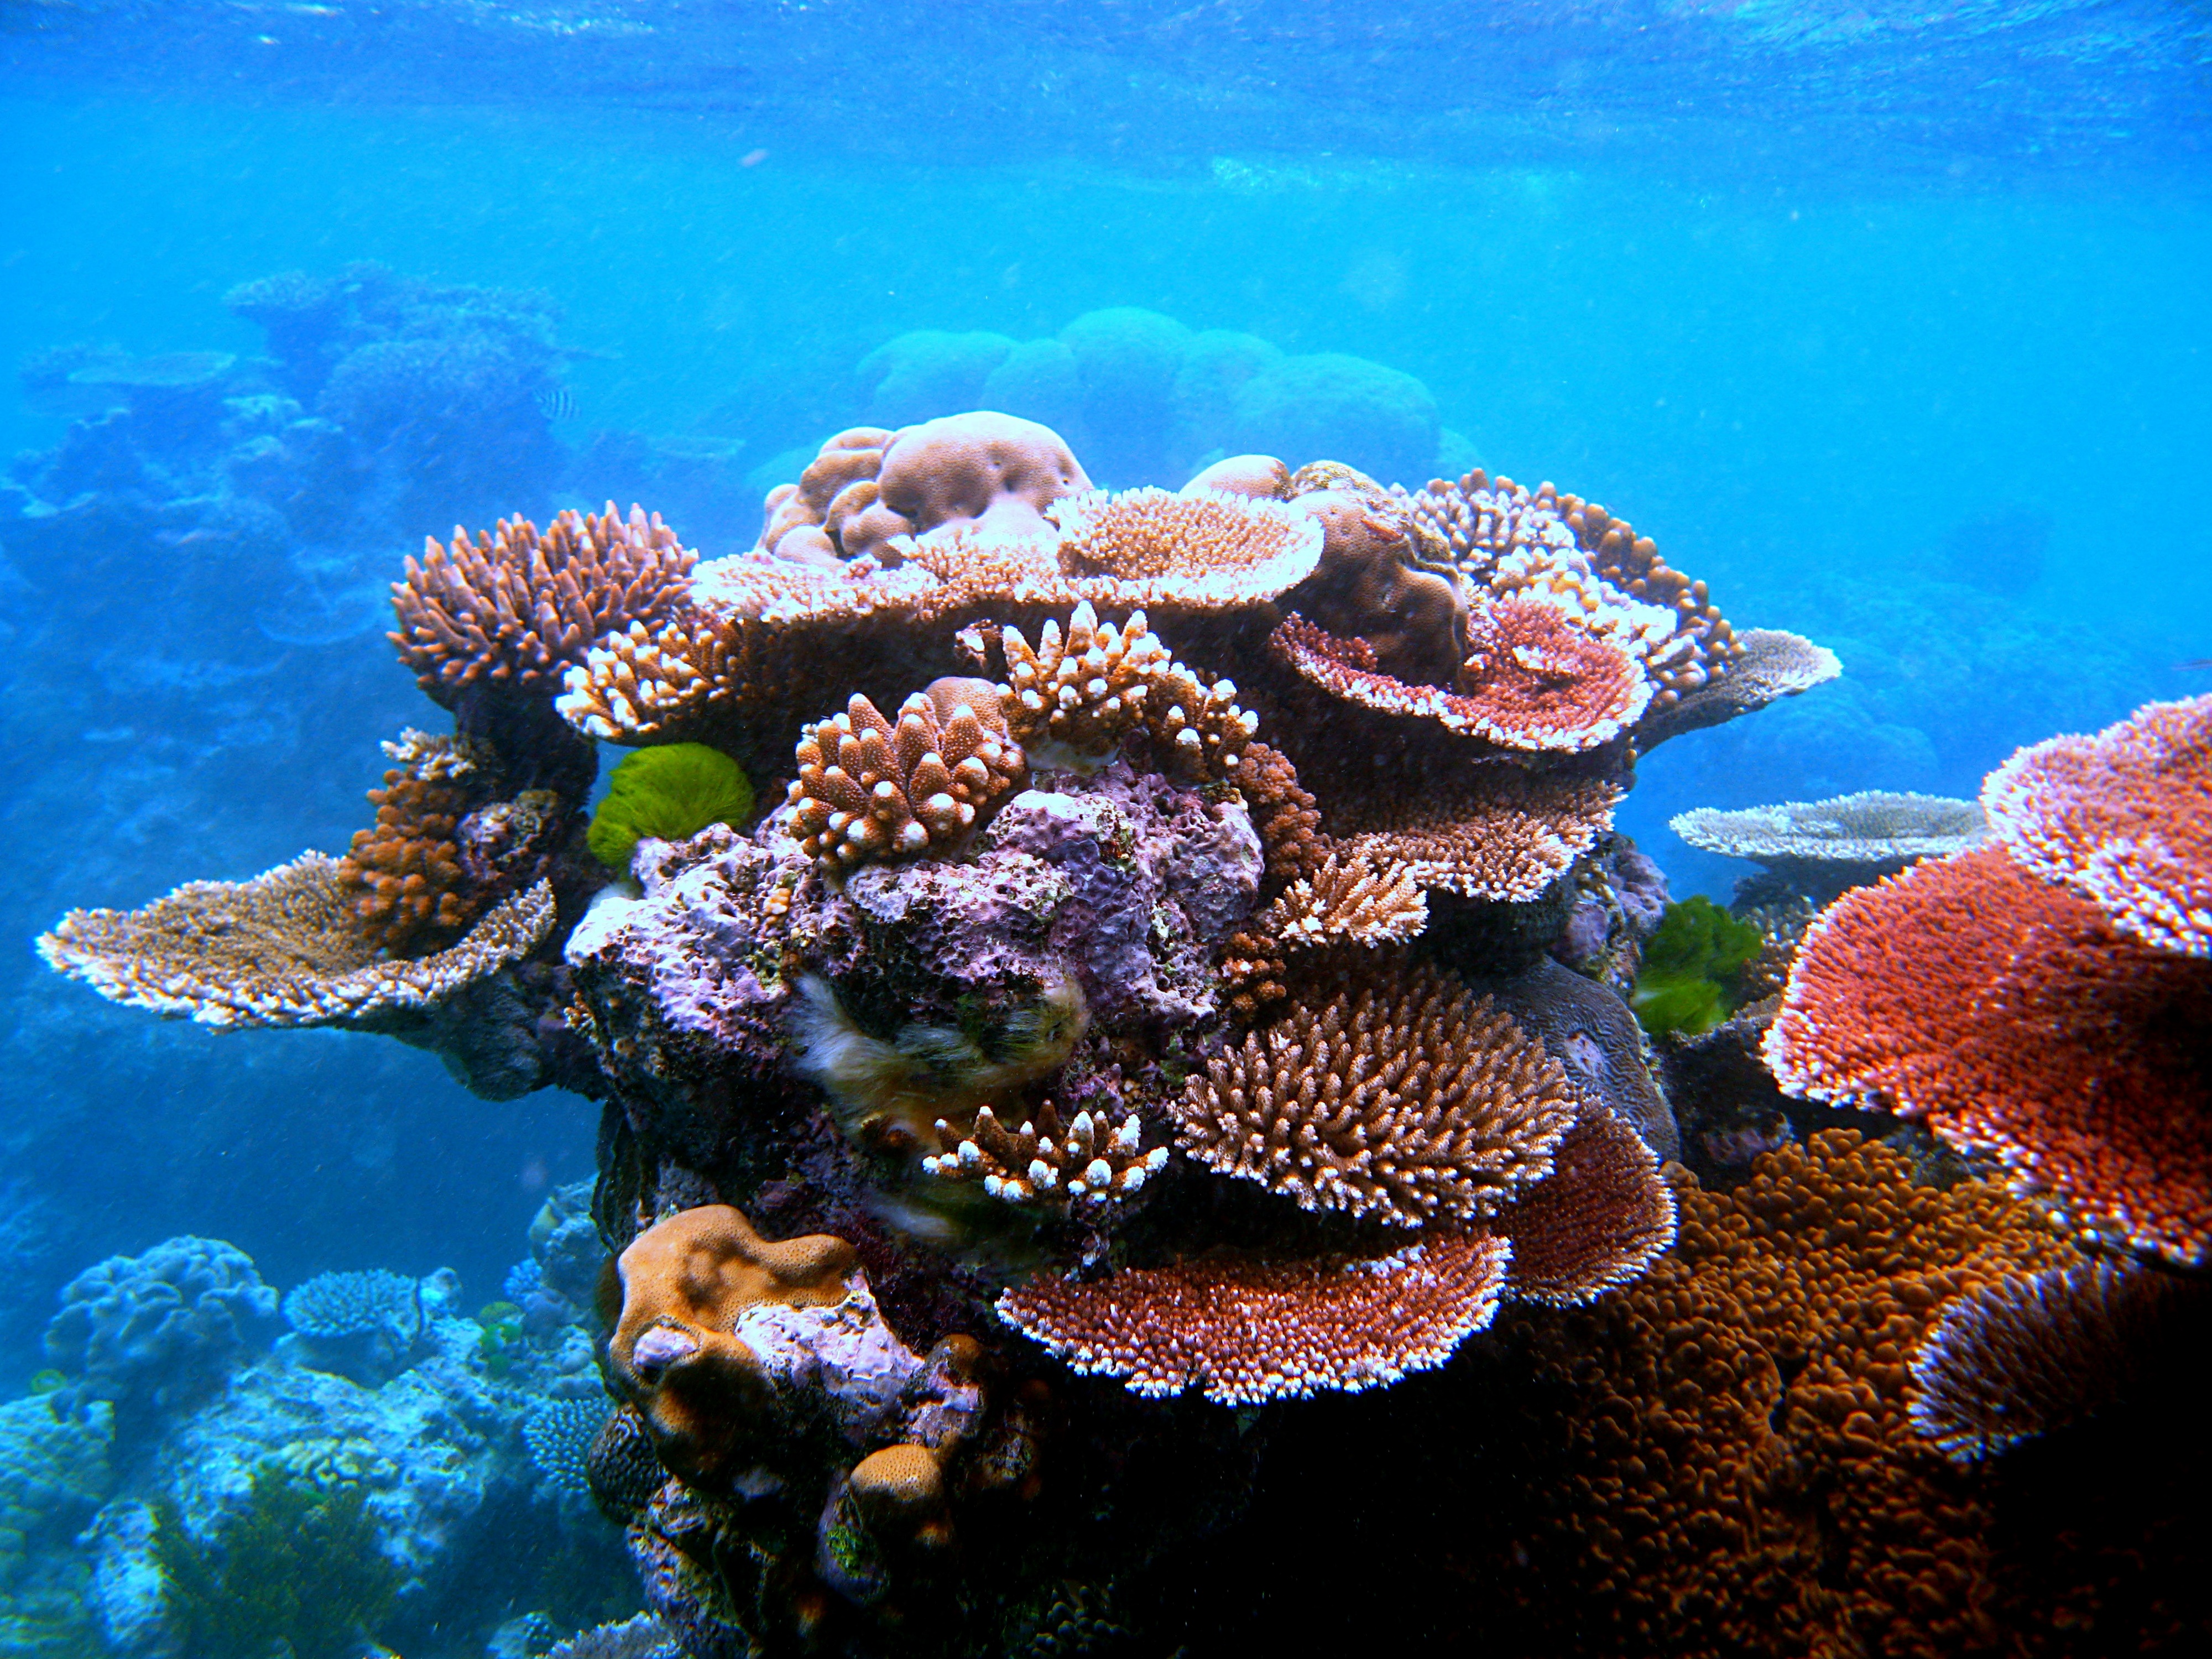  Corals in the Great Barrier Reef. (Wikimedia Commons)